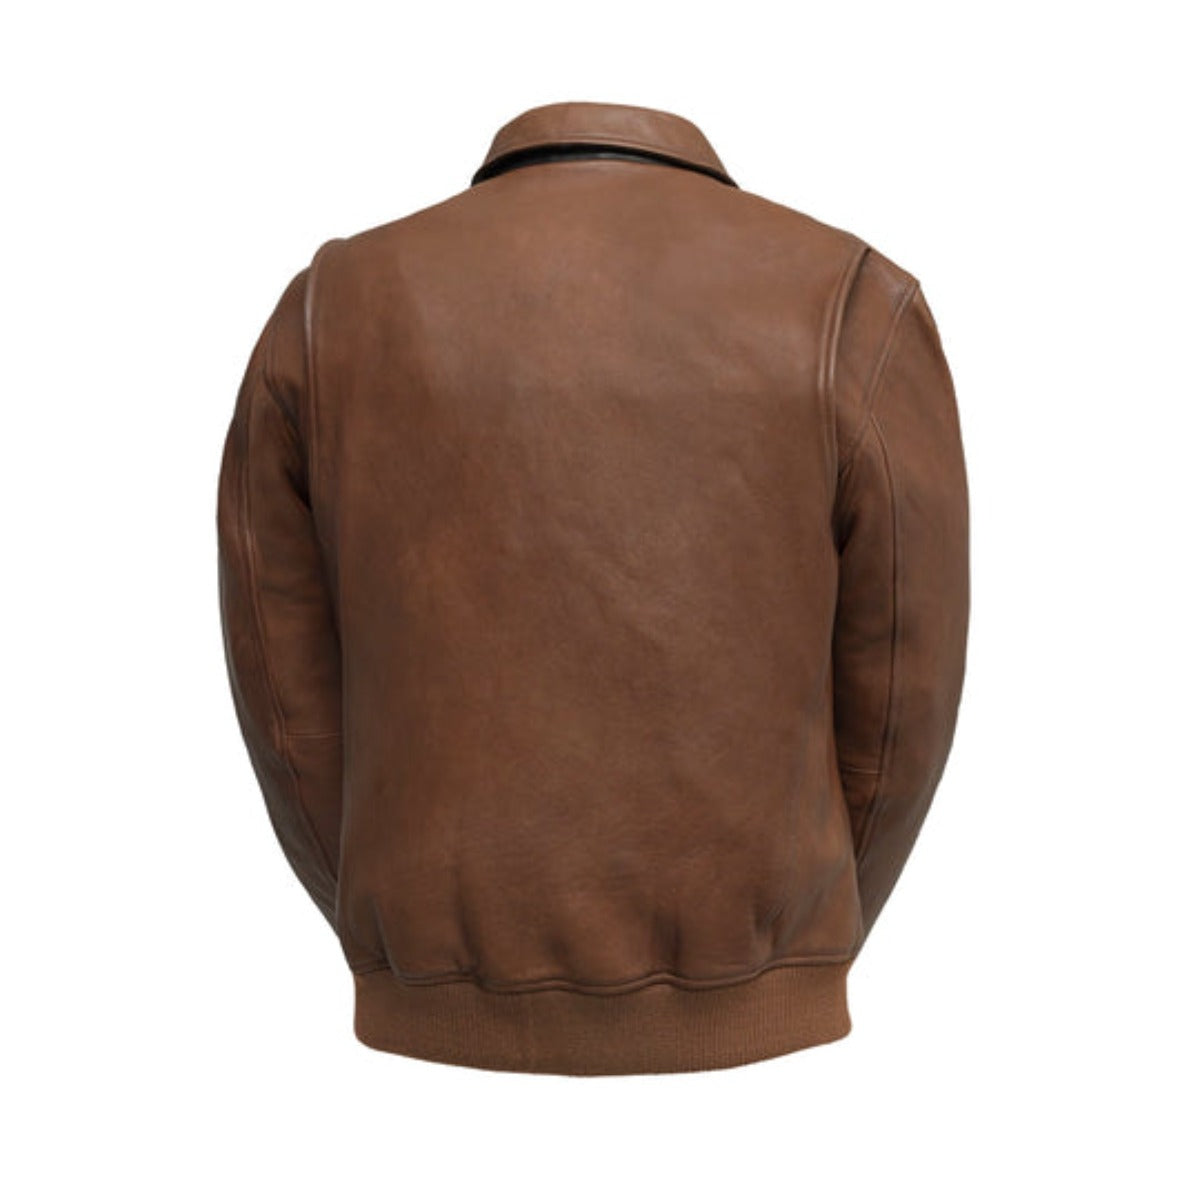 First Manufacturing Moto Bomber - Men's Leather Jacket, Cognac